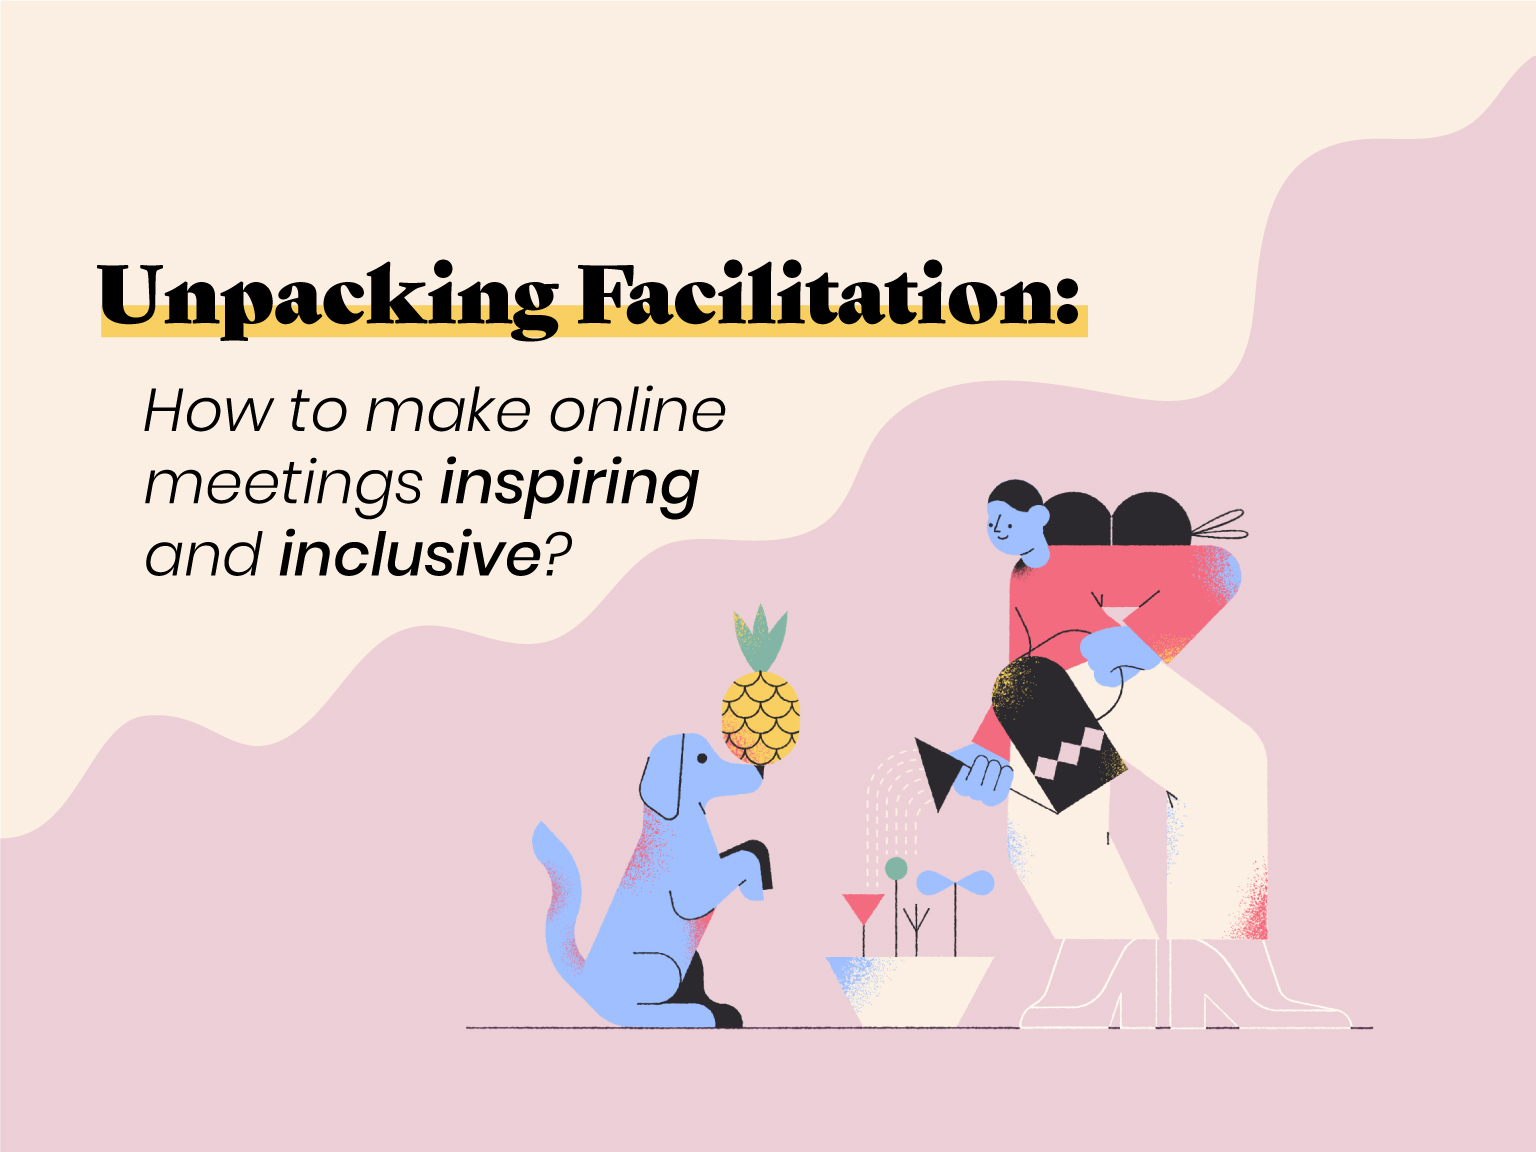 How to make online meetings inspiring and inclusive